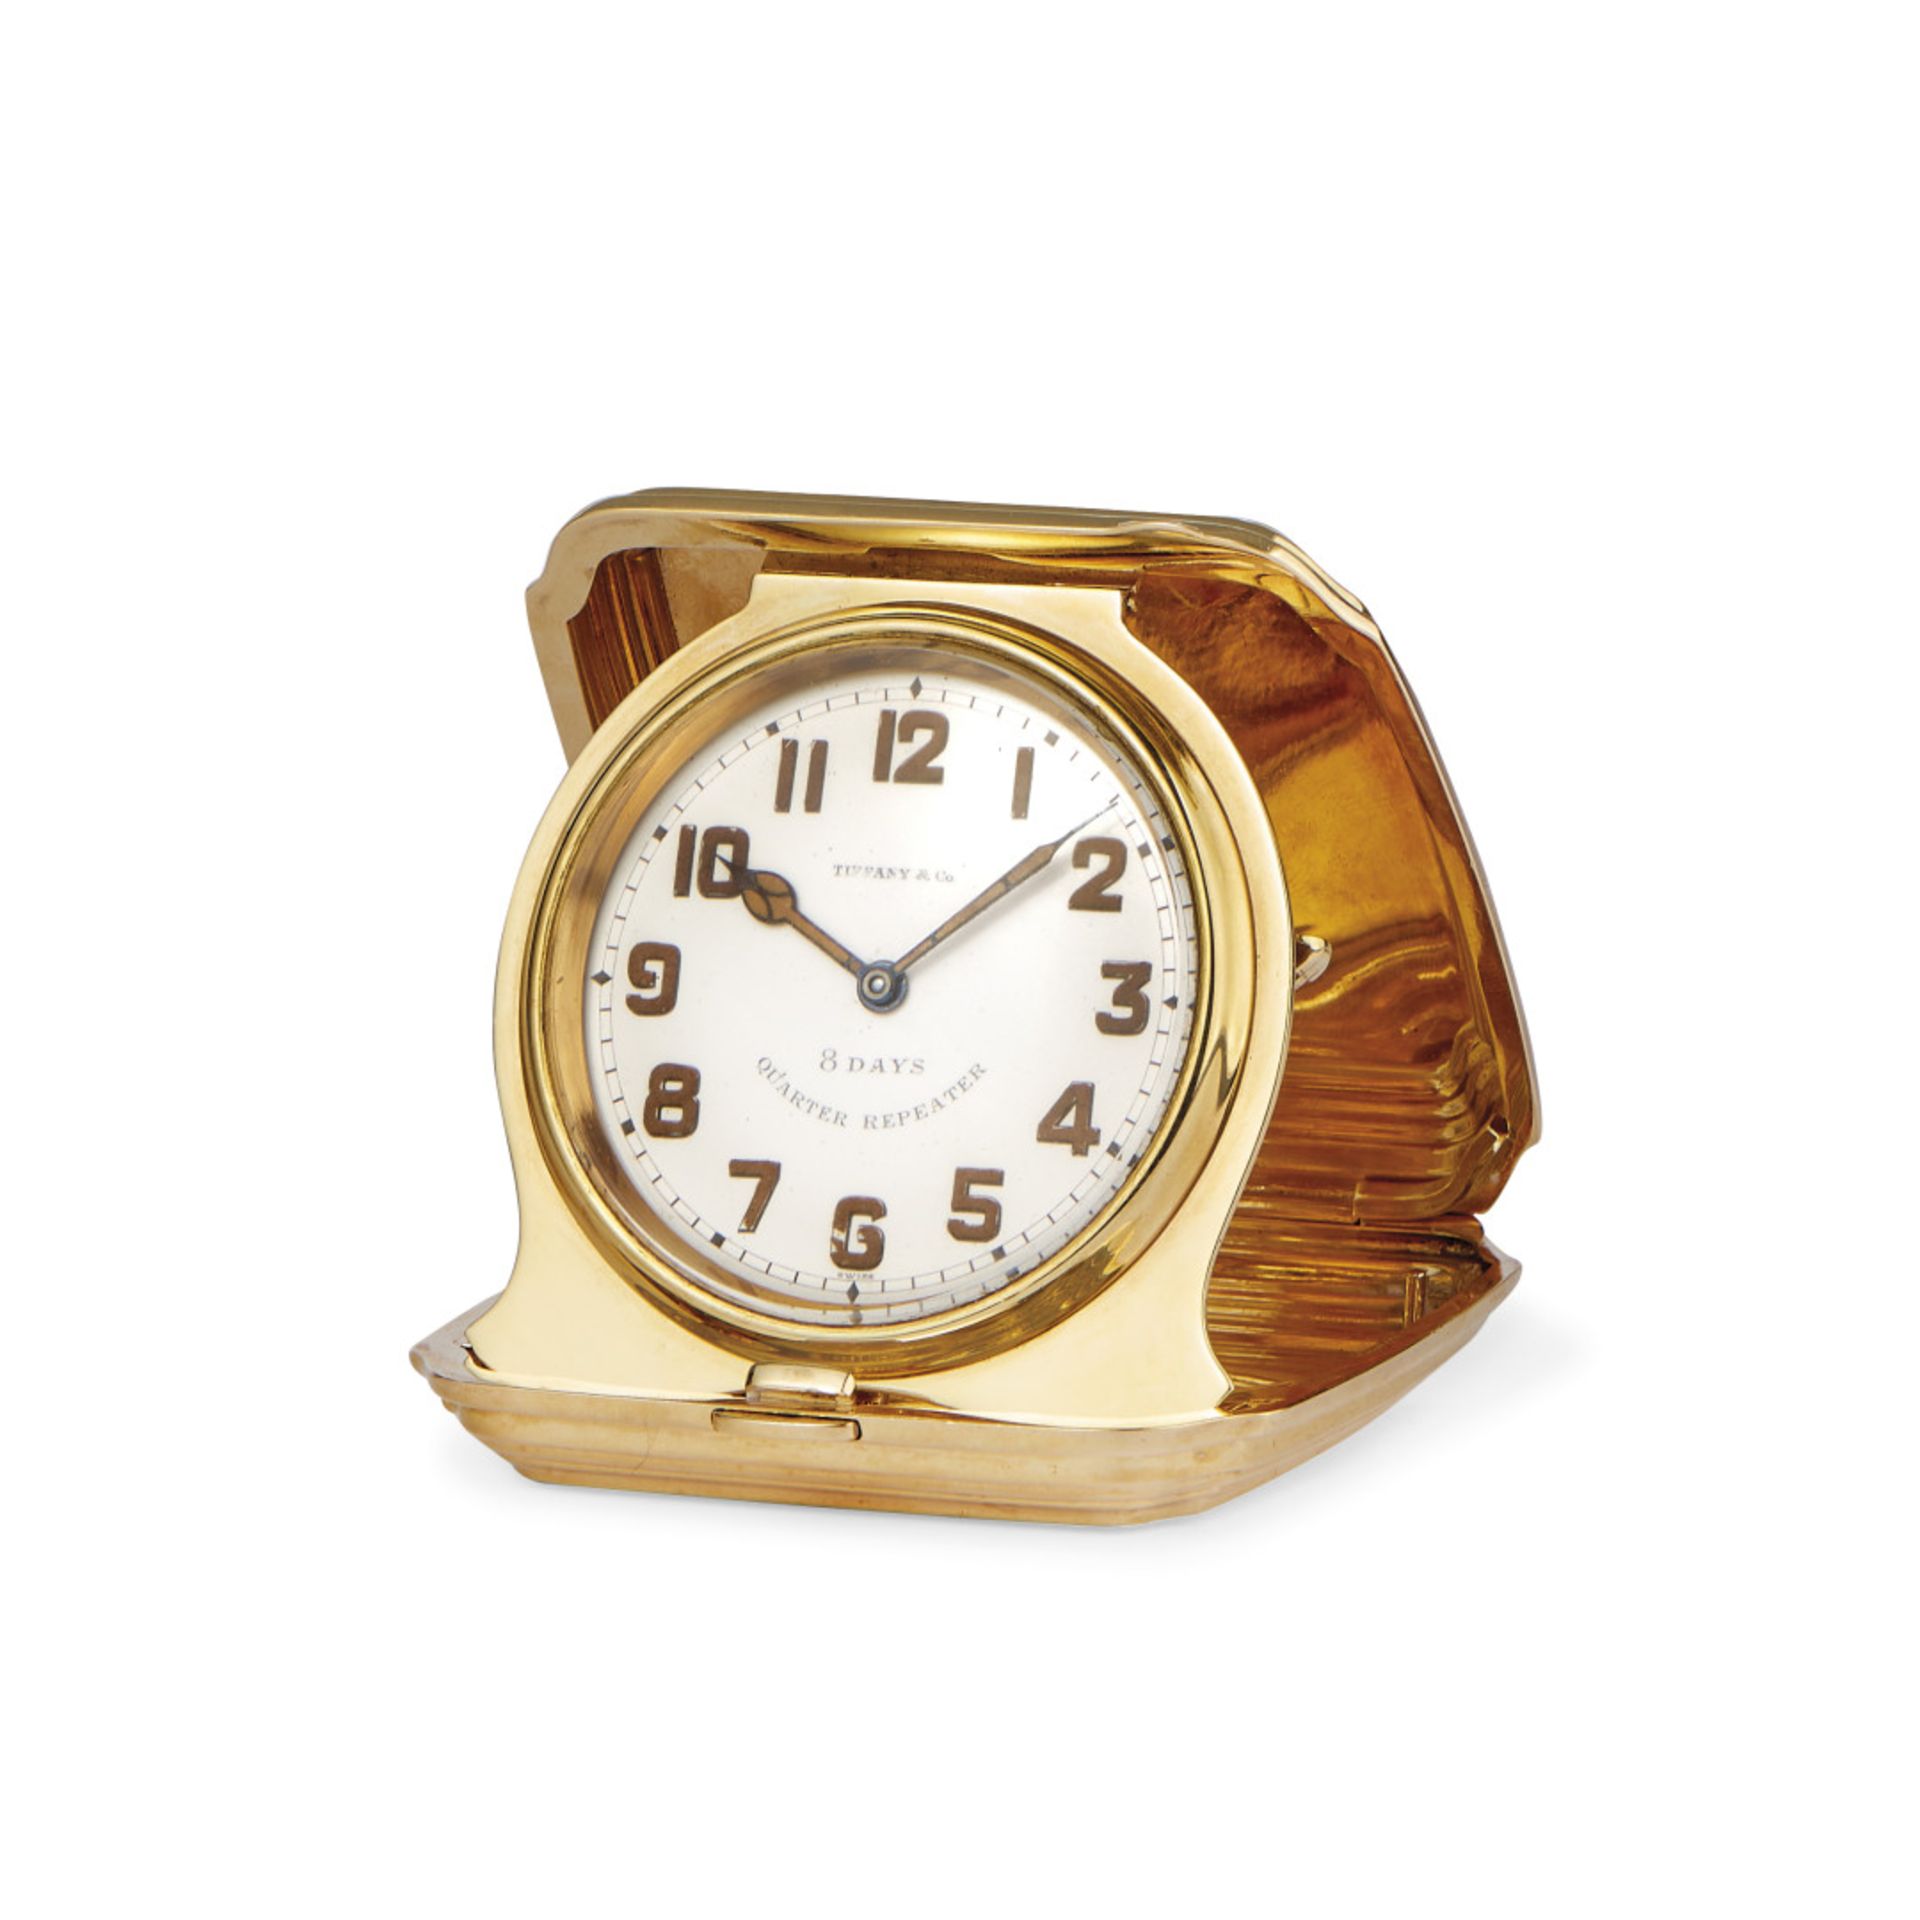 TIFFANY TRAVEL 8-DAY IN GOLD WITH REPEATER, EARLY 1900s - TIFFANY TRAVEL 8-DAY IN GOLD WITH